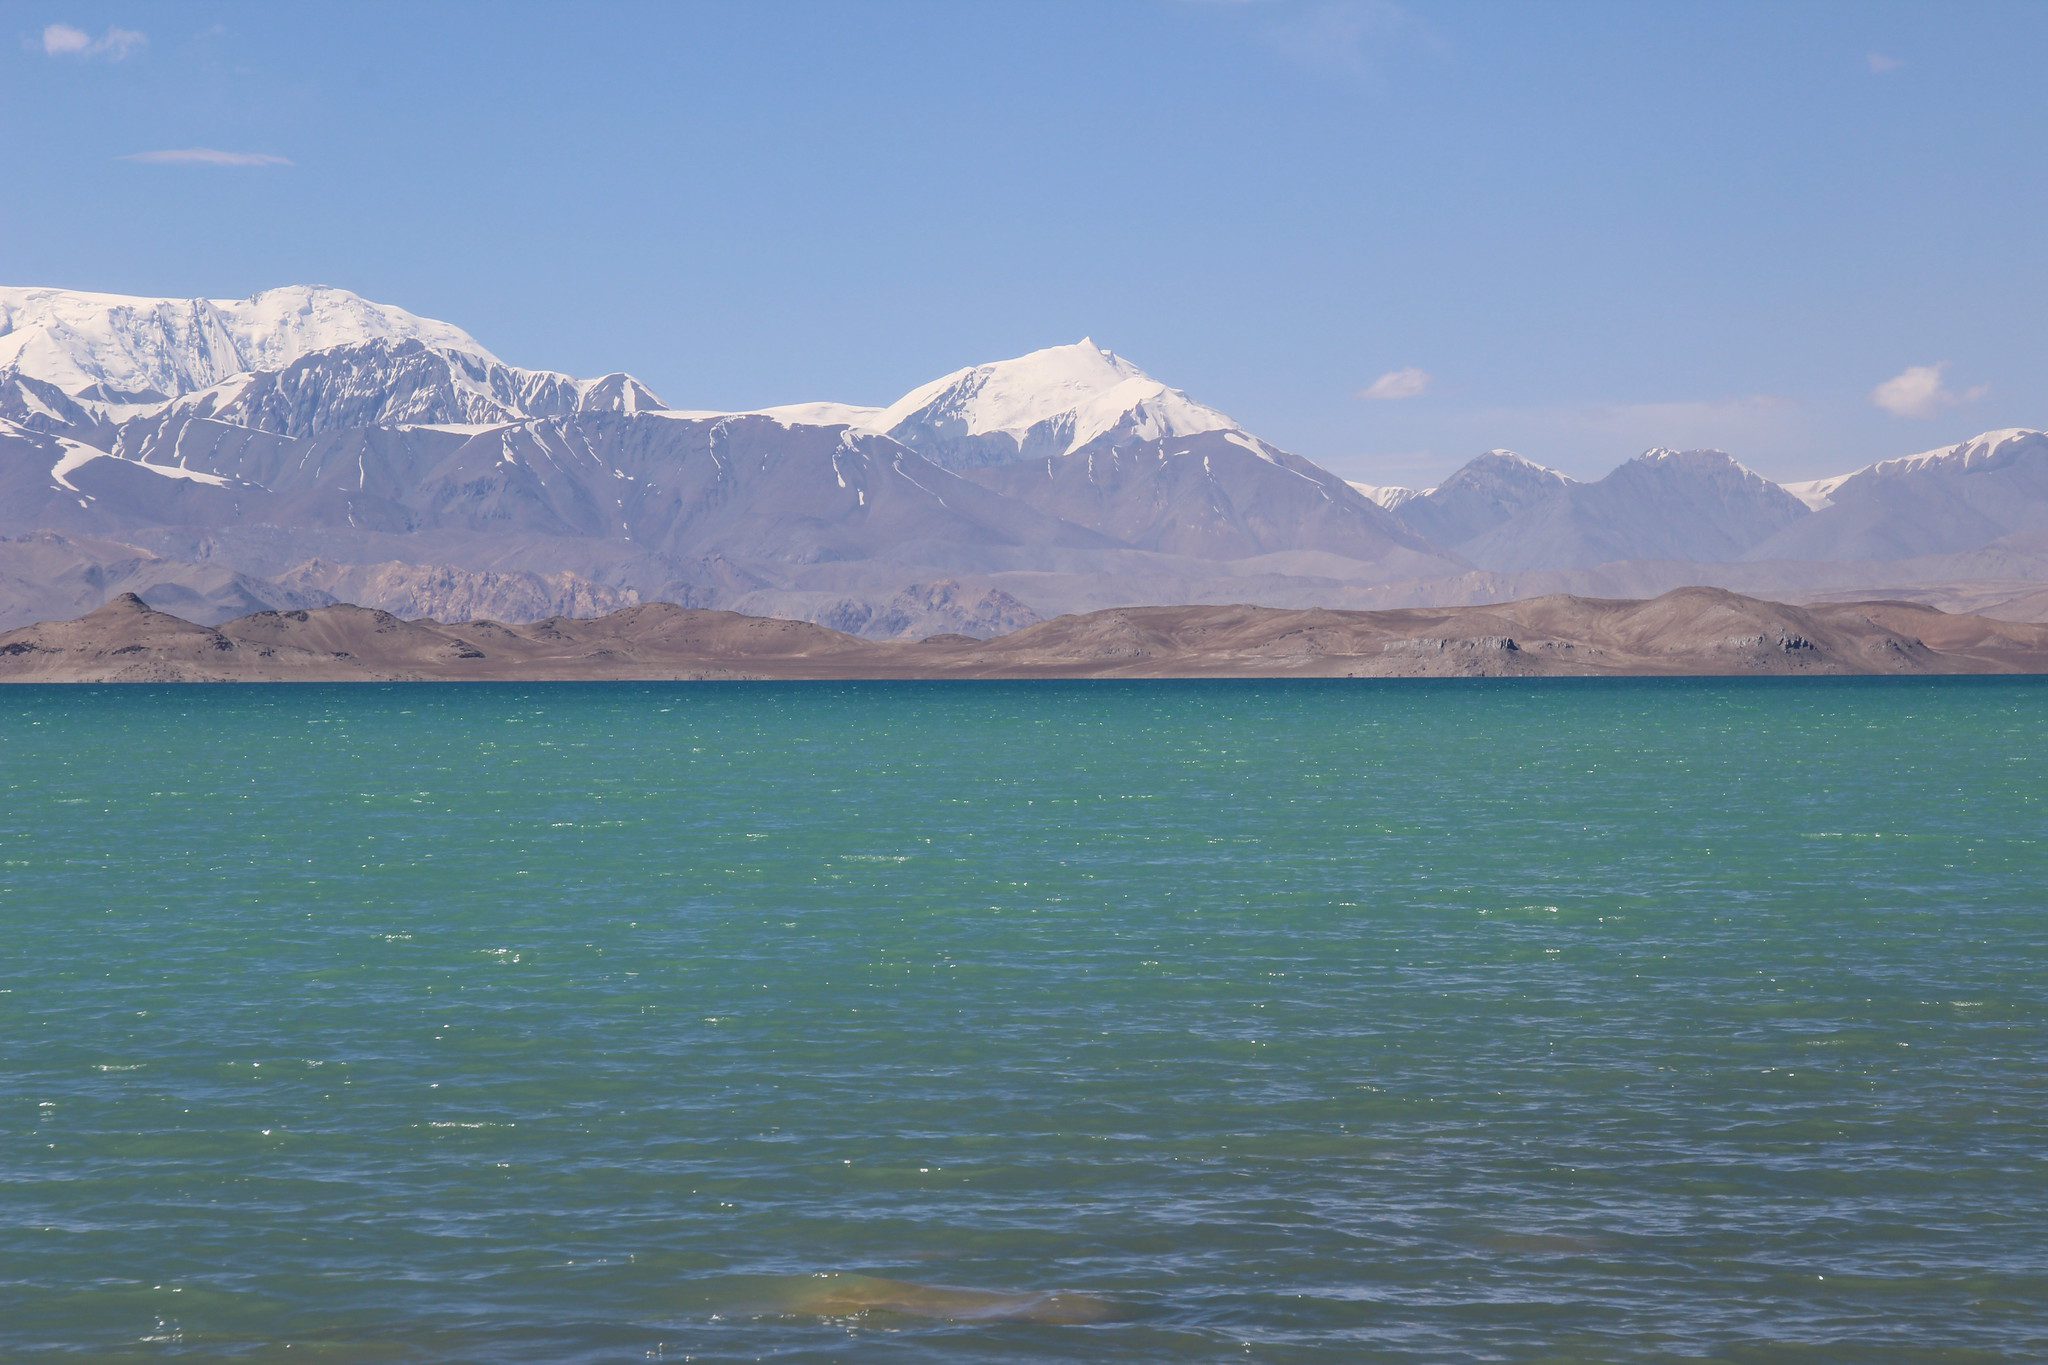 Lake and ice-capped mountains in Tajikistan